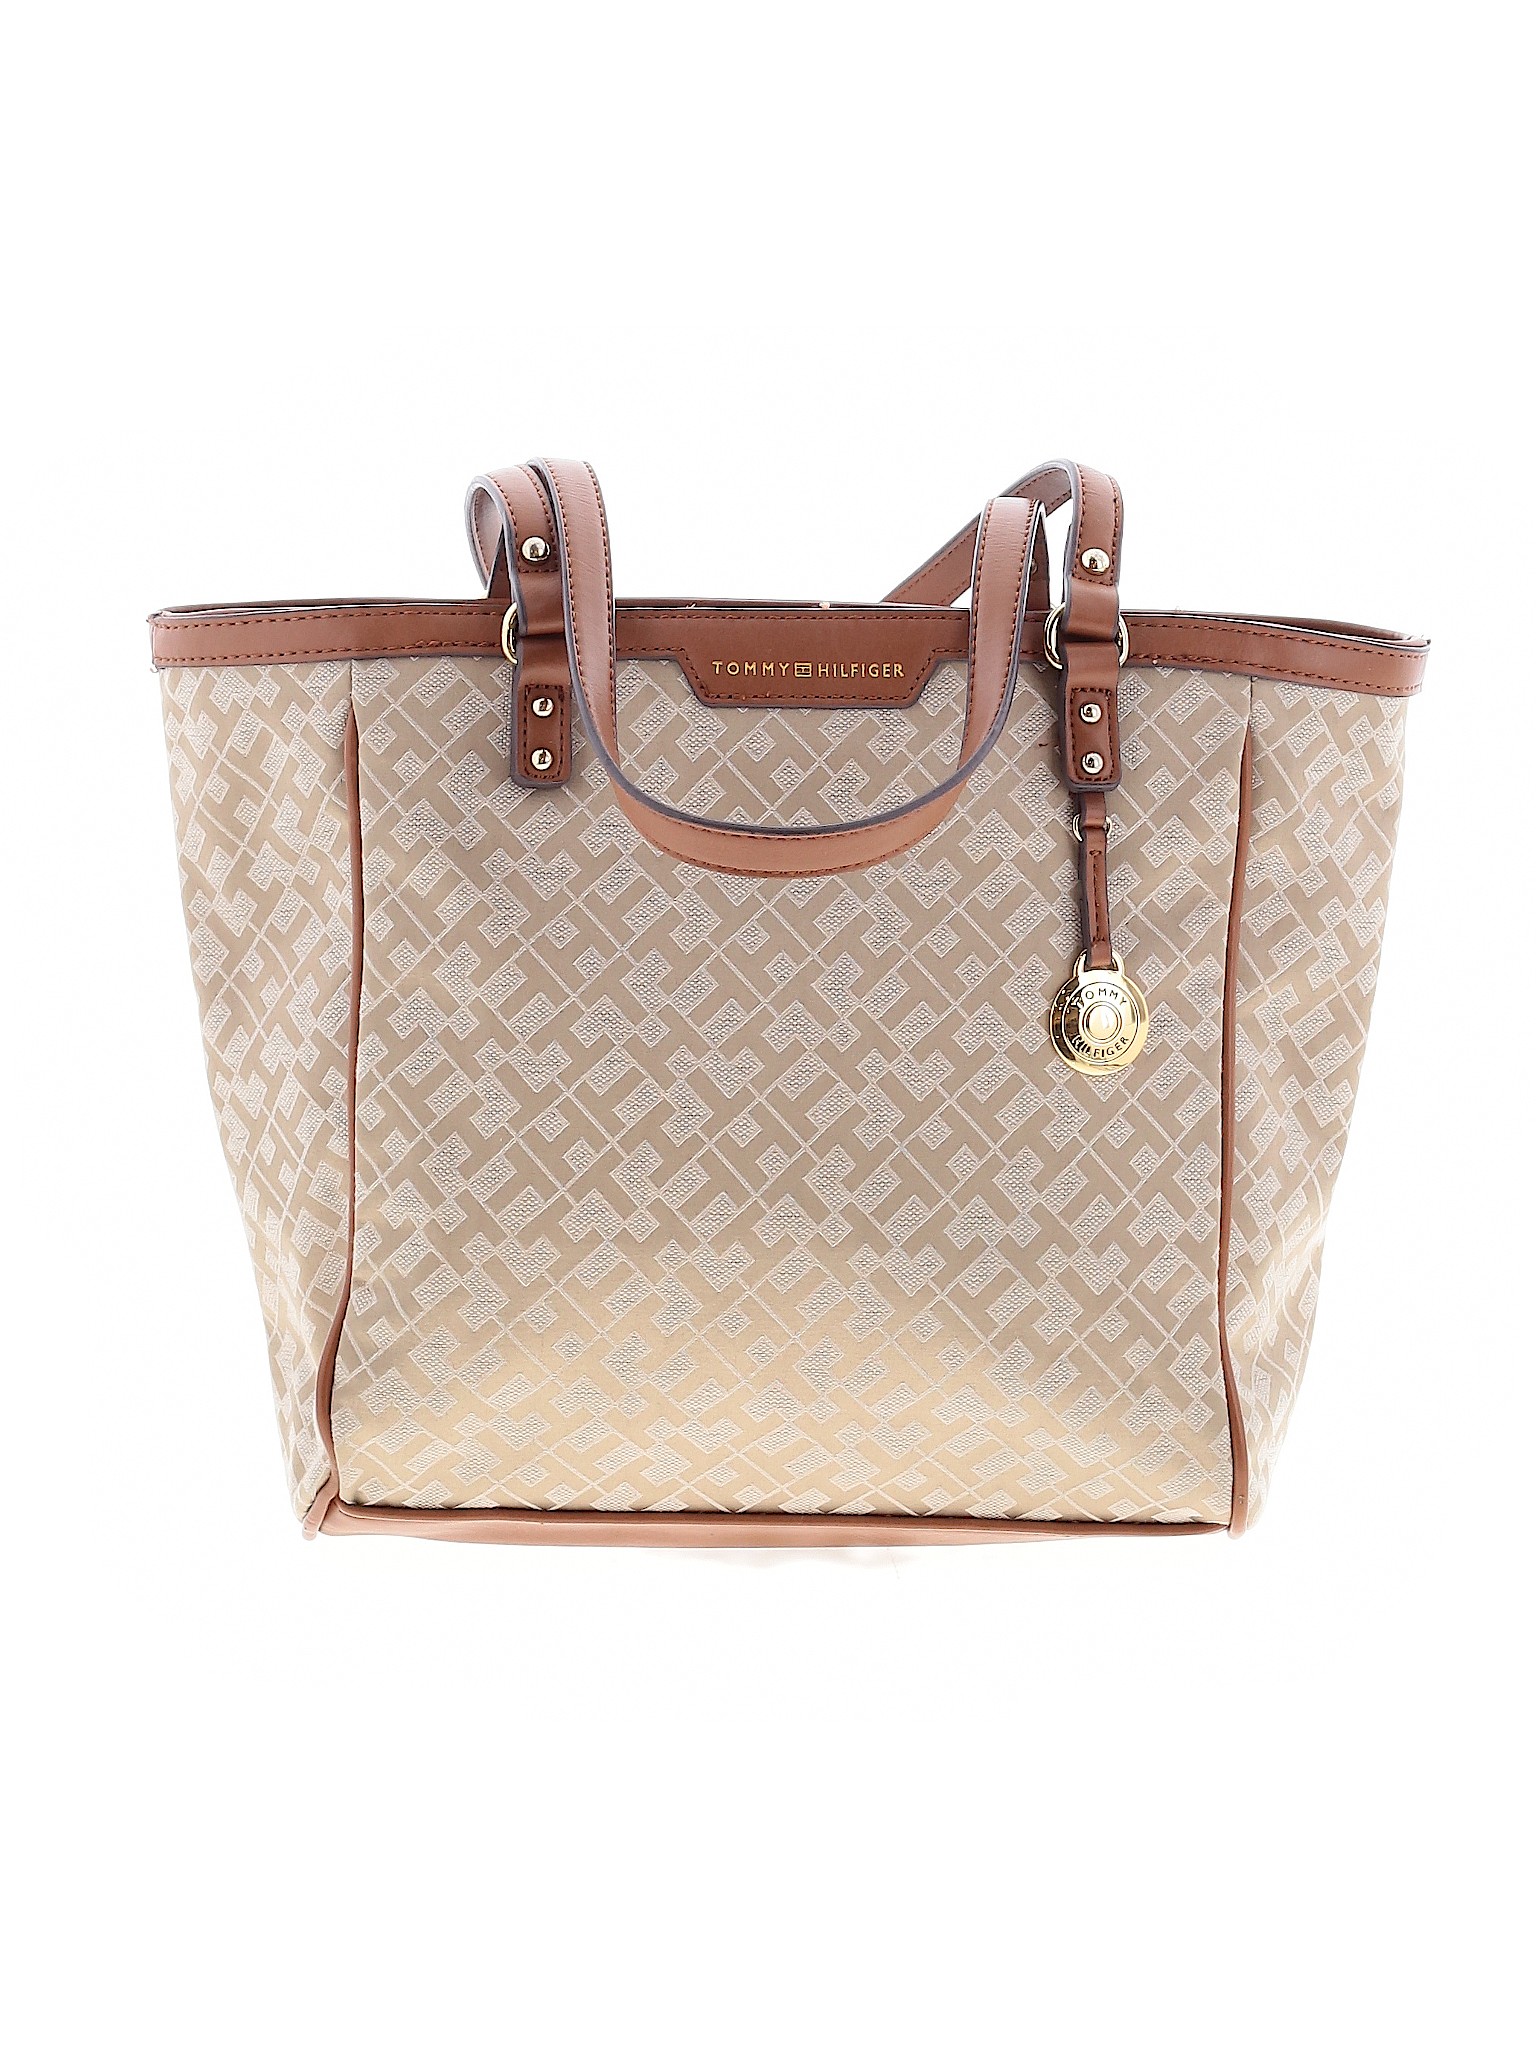 Tommy Hilfiger Tan Tote One Size - 68% off | thredUP